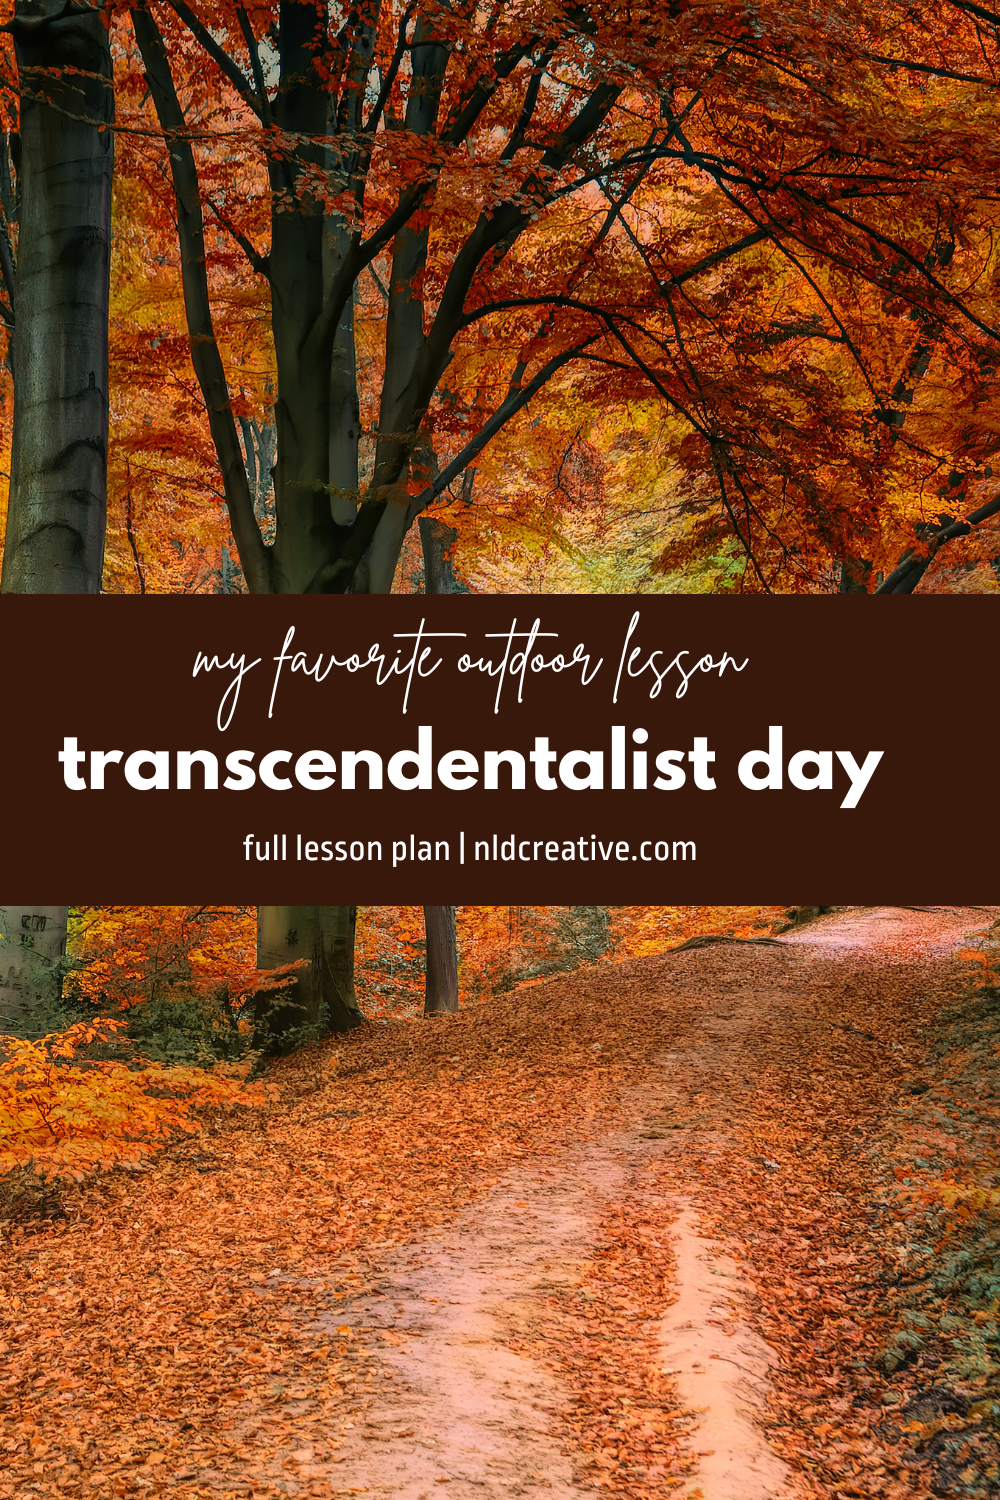 fall forest path with the words "my favorite lesson, transcendentalist day, full lesson plan | nldcreative.com"